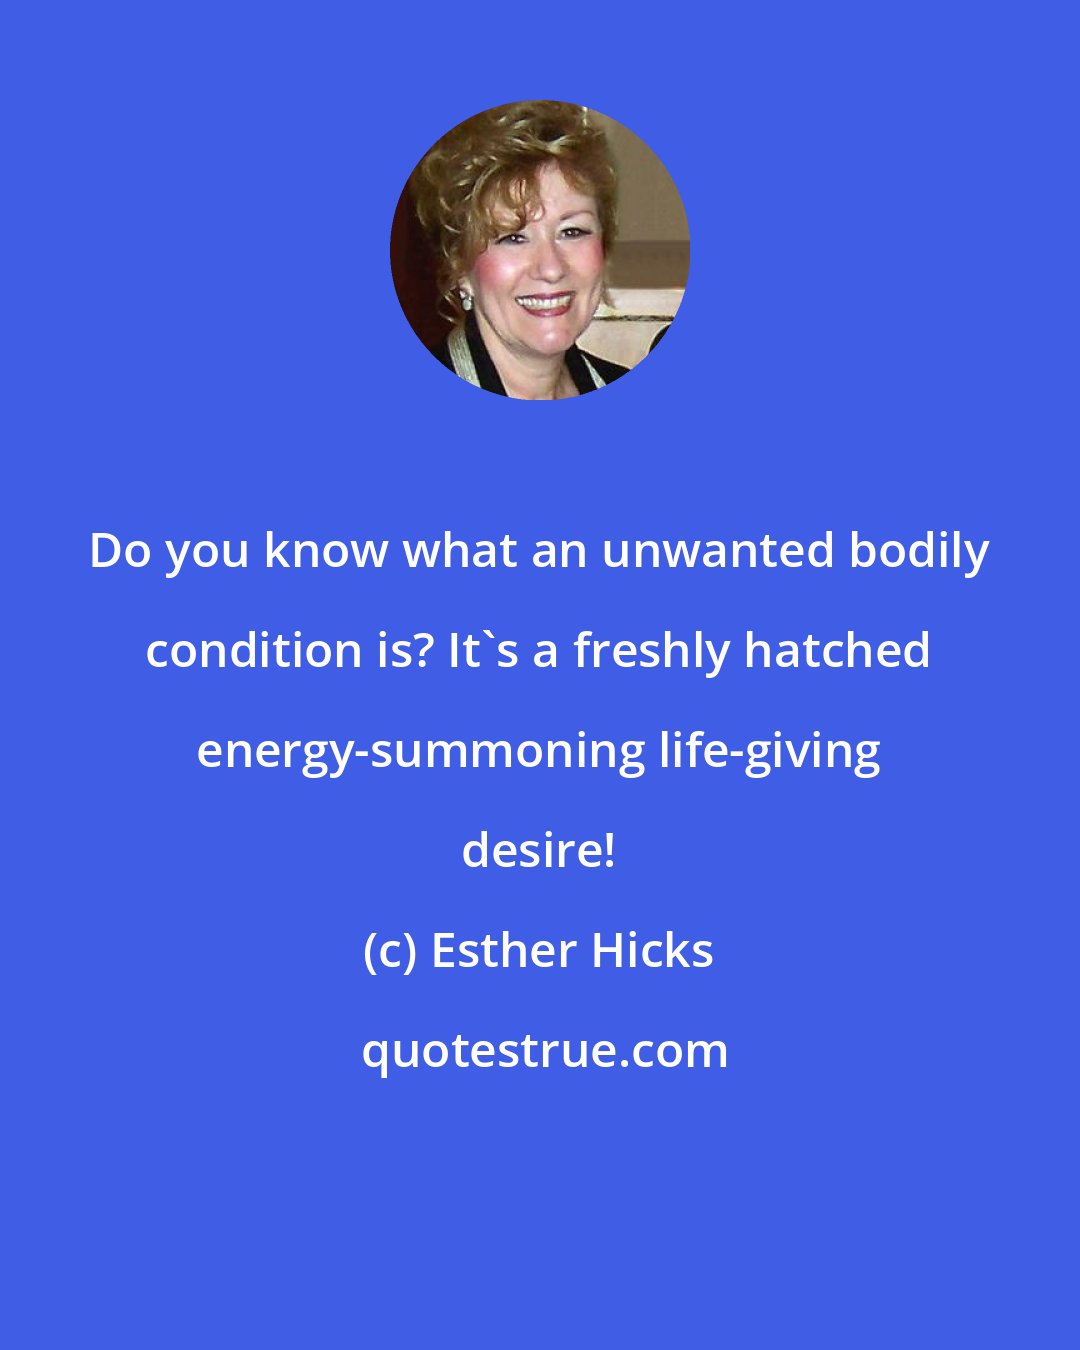 Esther Hicks: Do you know what an unwanted bodily condition is? It's a freshly hatched energy-summoning life-giving desire!